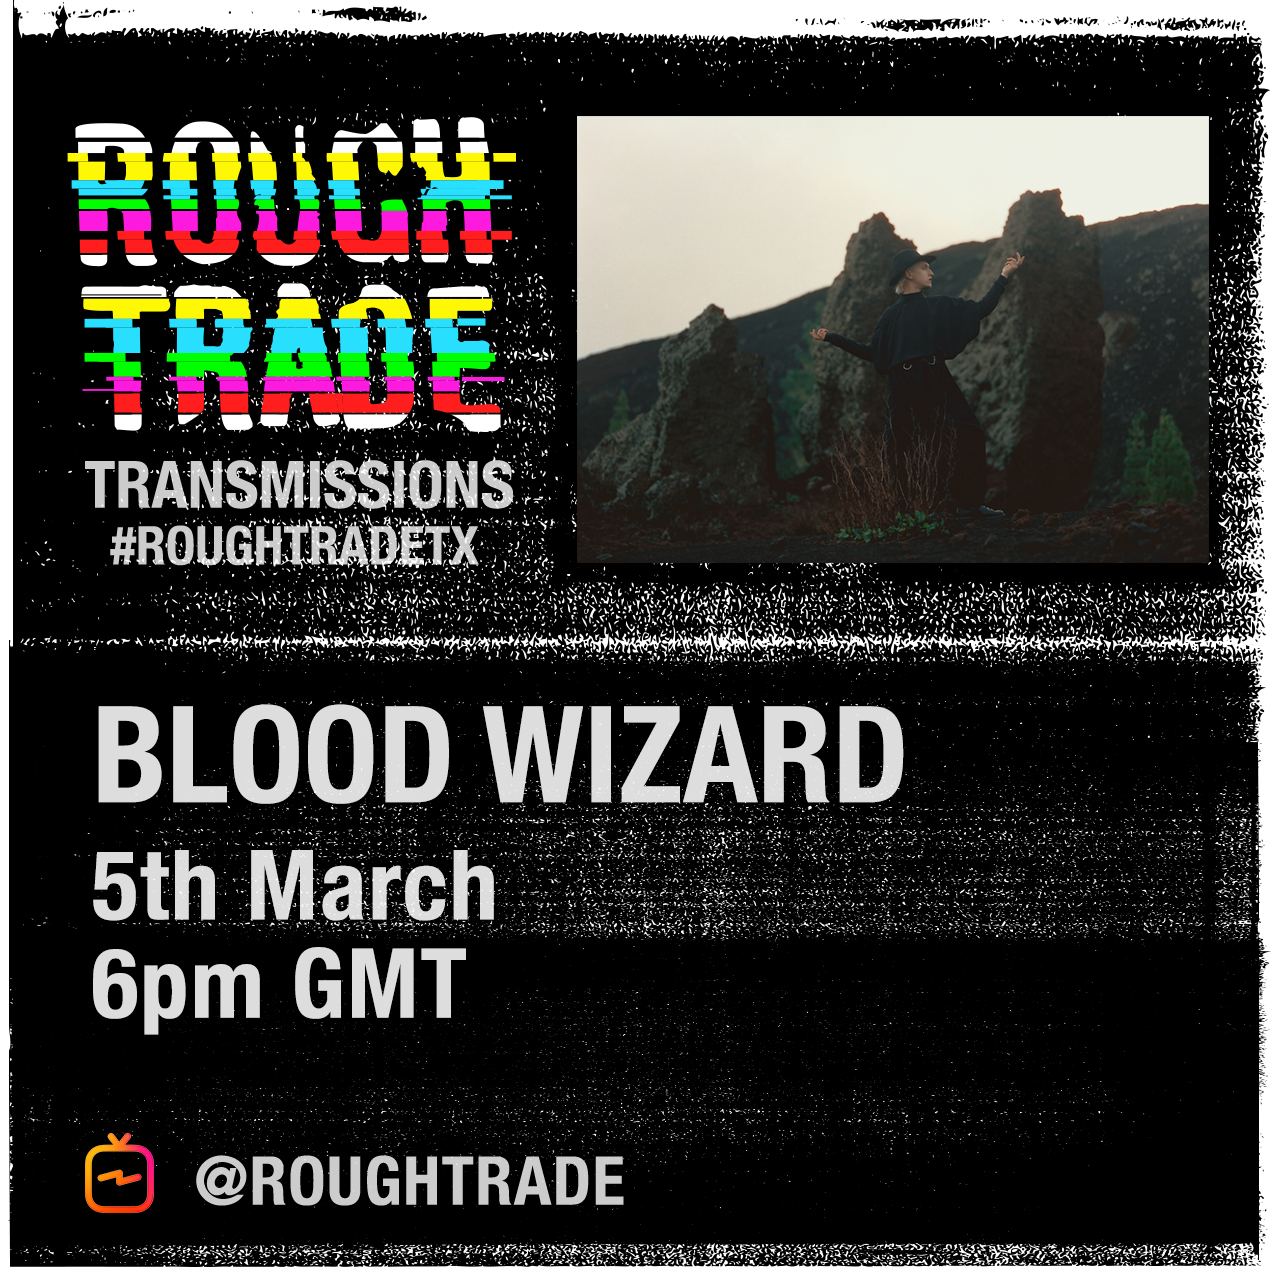 Rough Trade Transmissions featuring Blood Wizard @ 6pm 5th March GMT